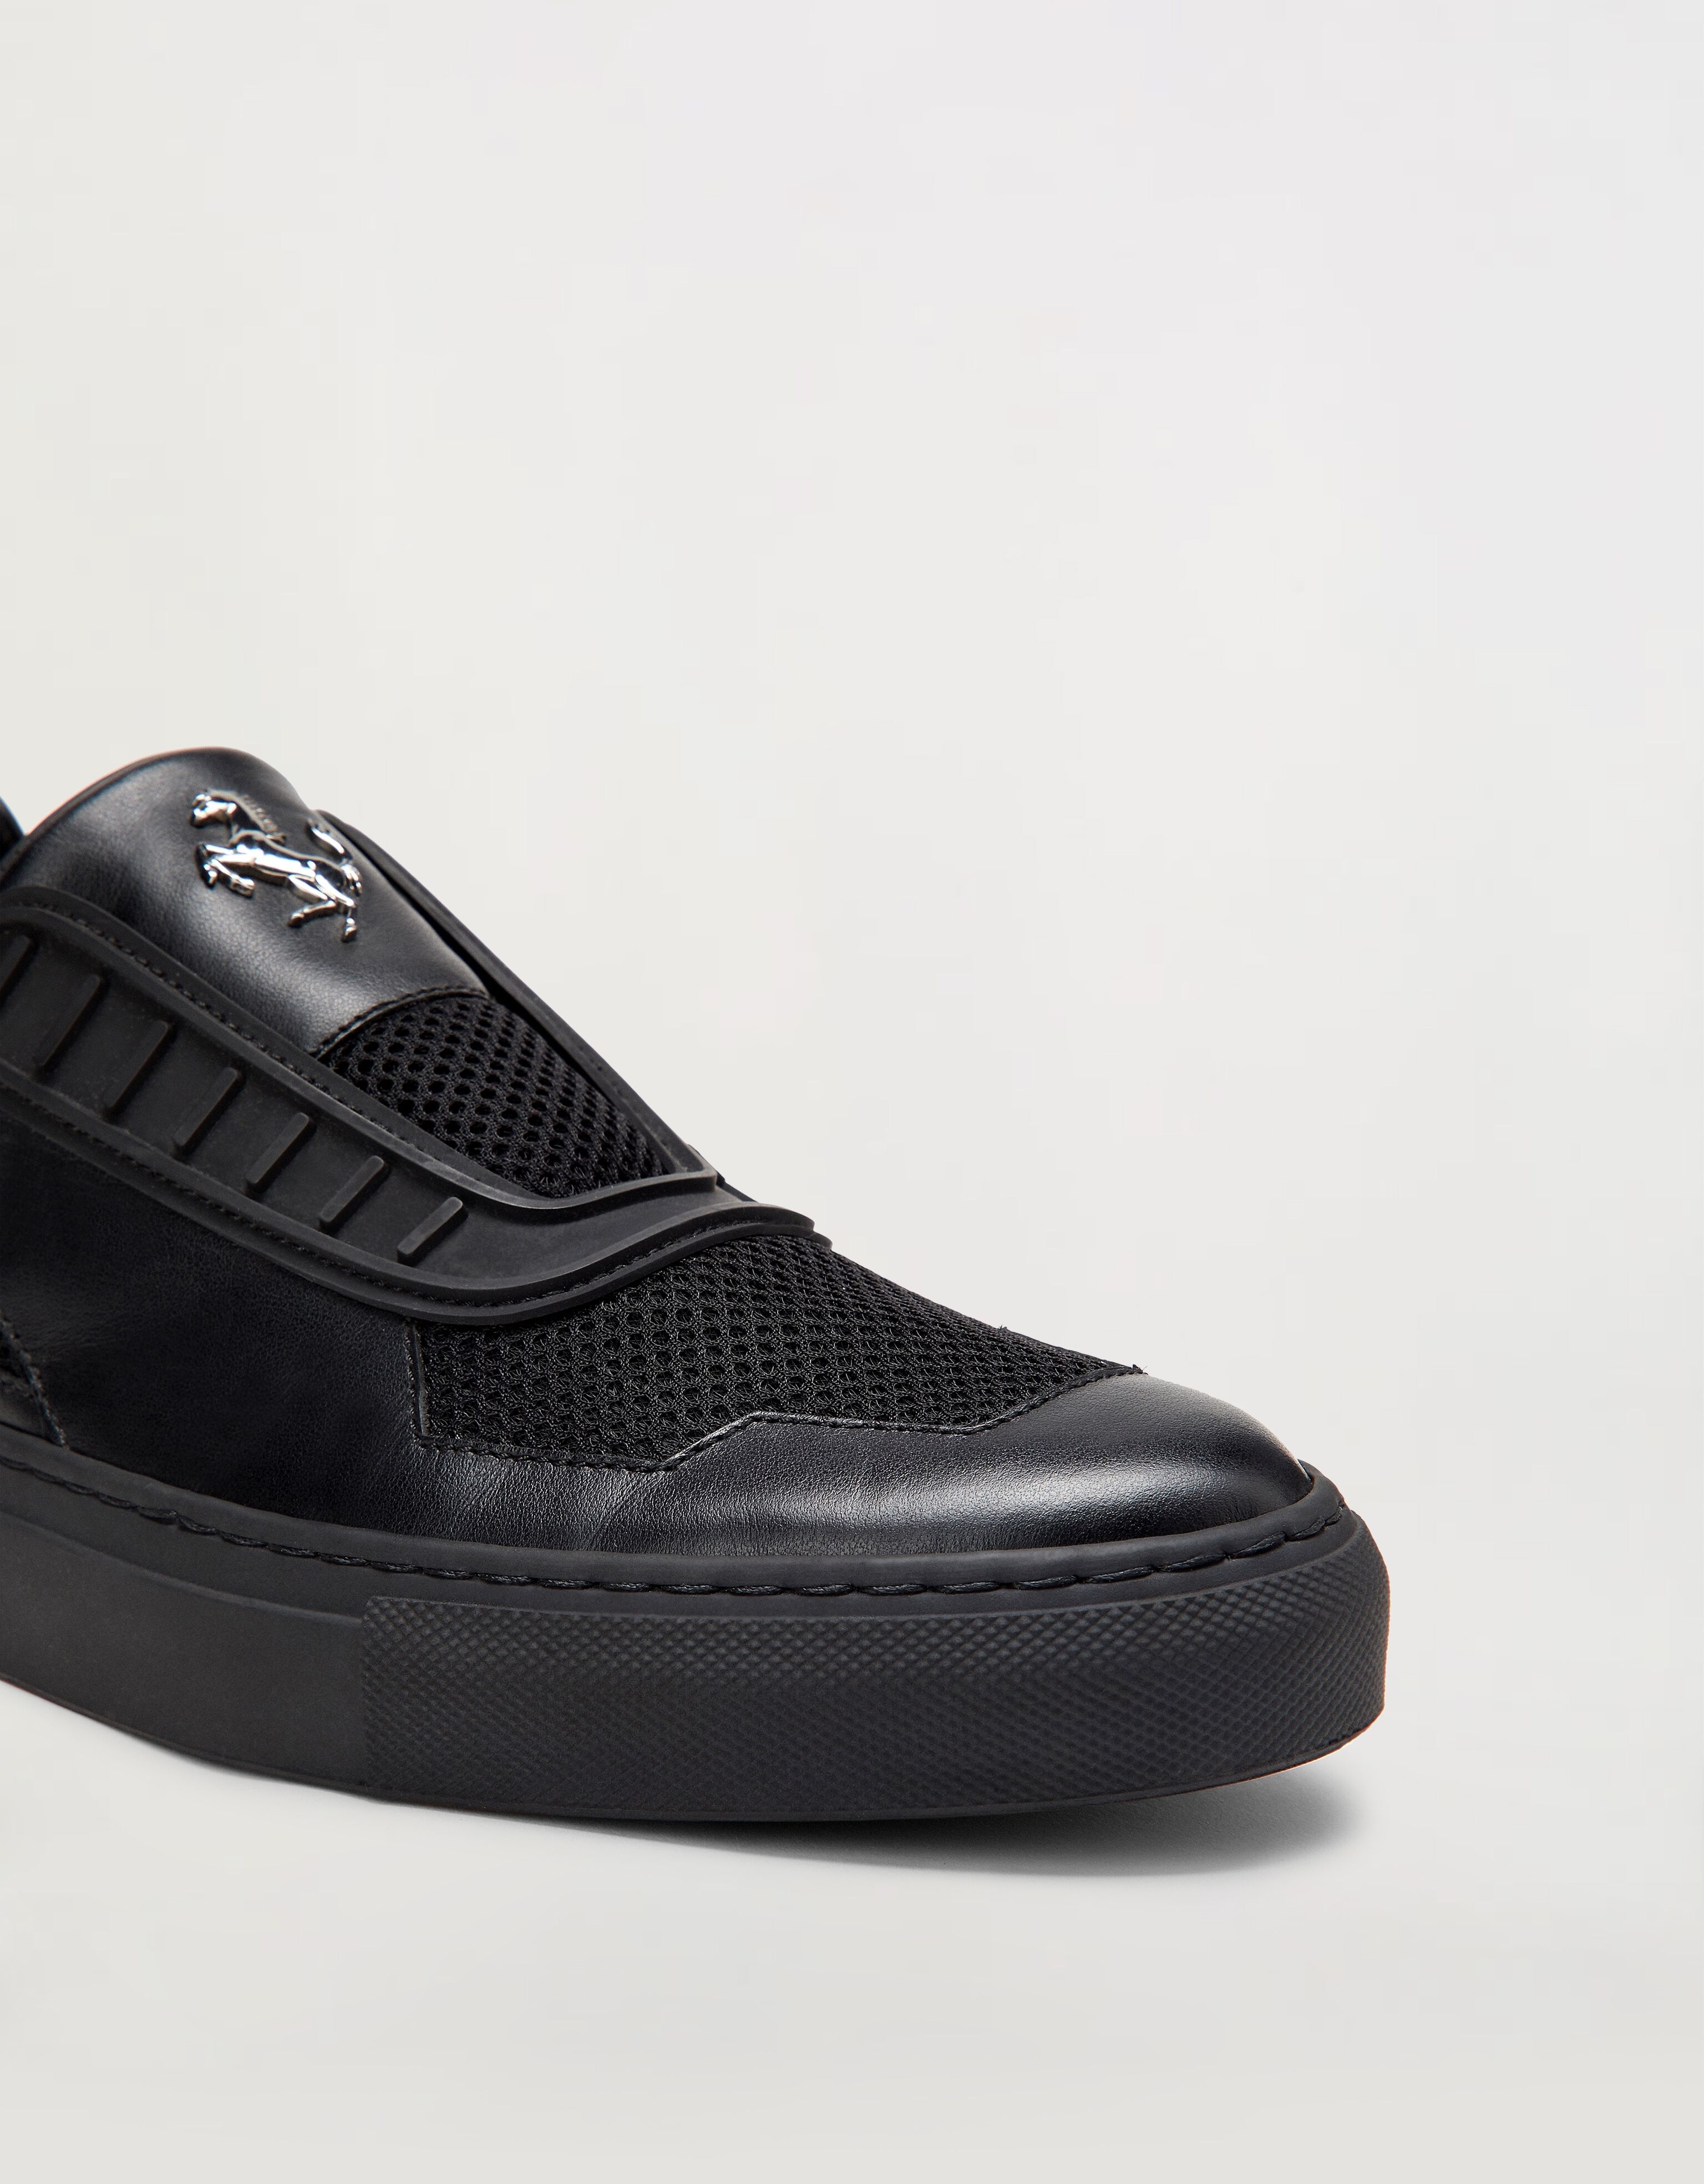 Ferrari Women's slip-on leather trainers featuring the Prancing Horse Black 47104f